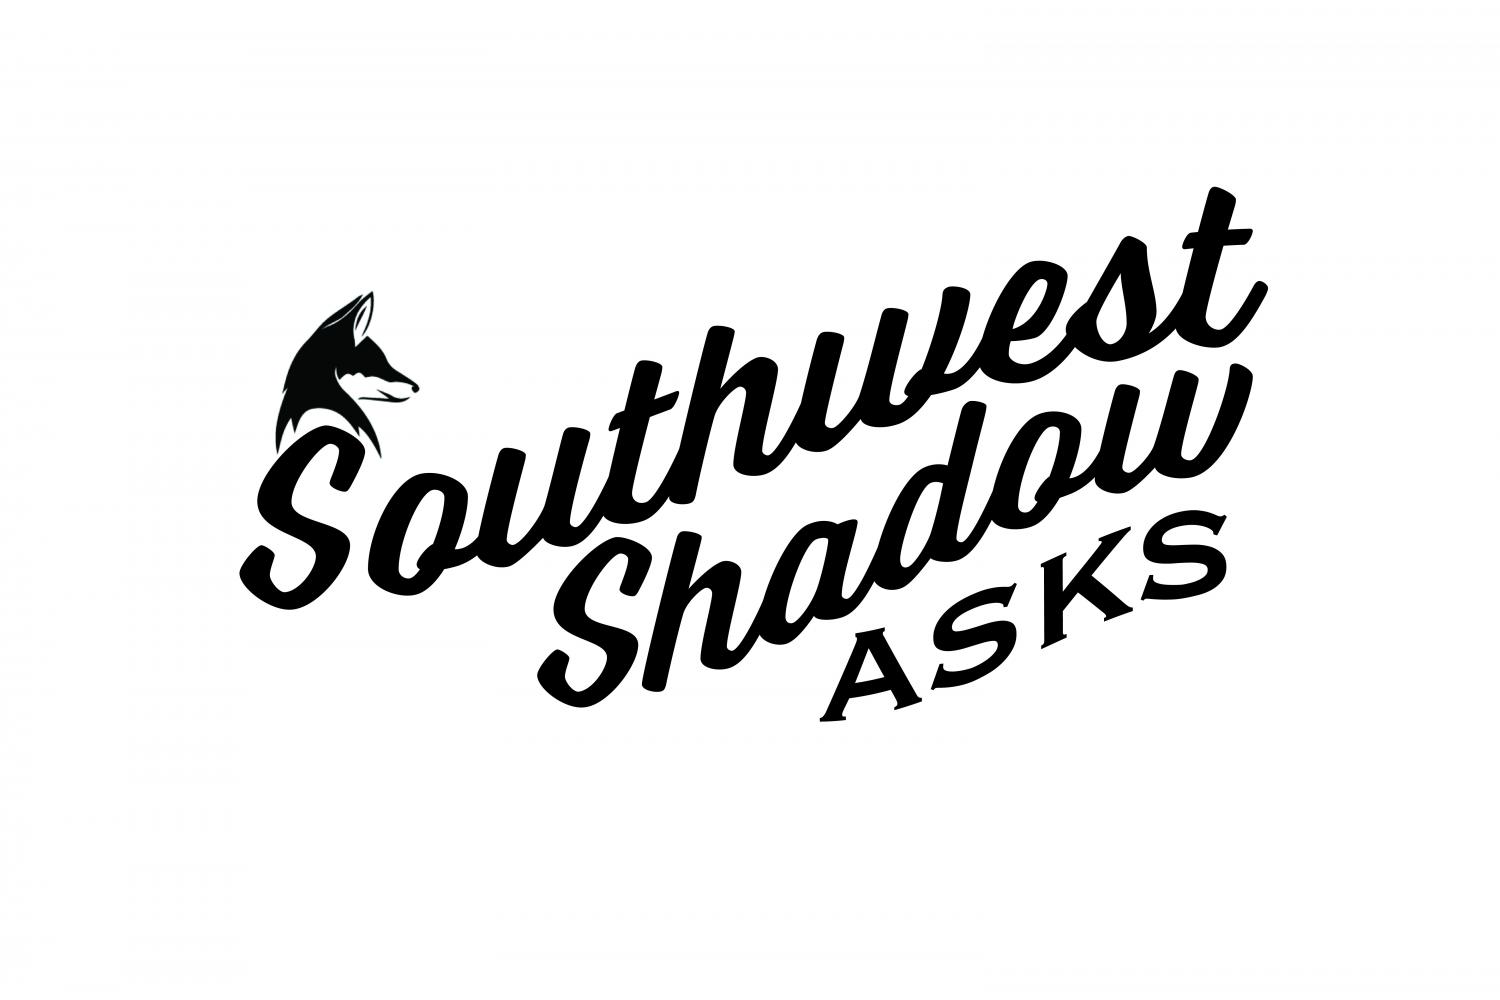 SOUTHWEST SHADOW ASKS: Clarisse Andrade